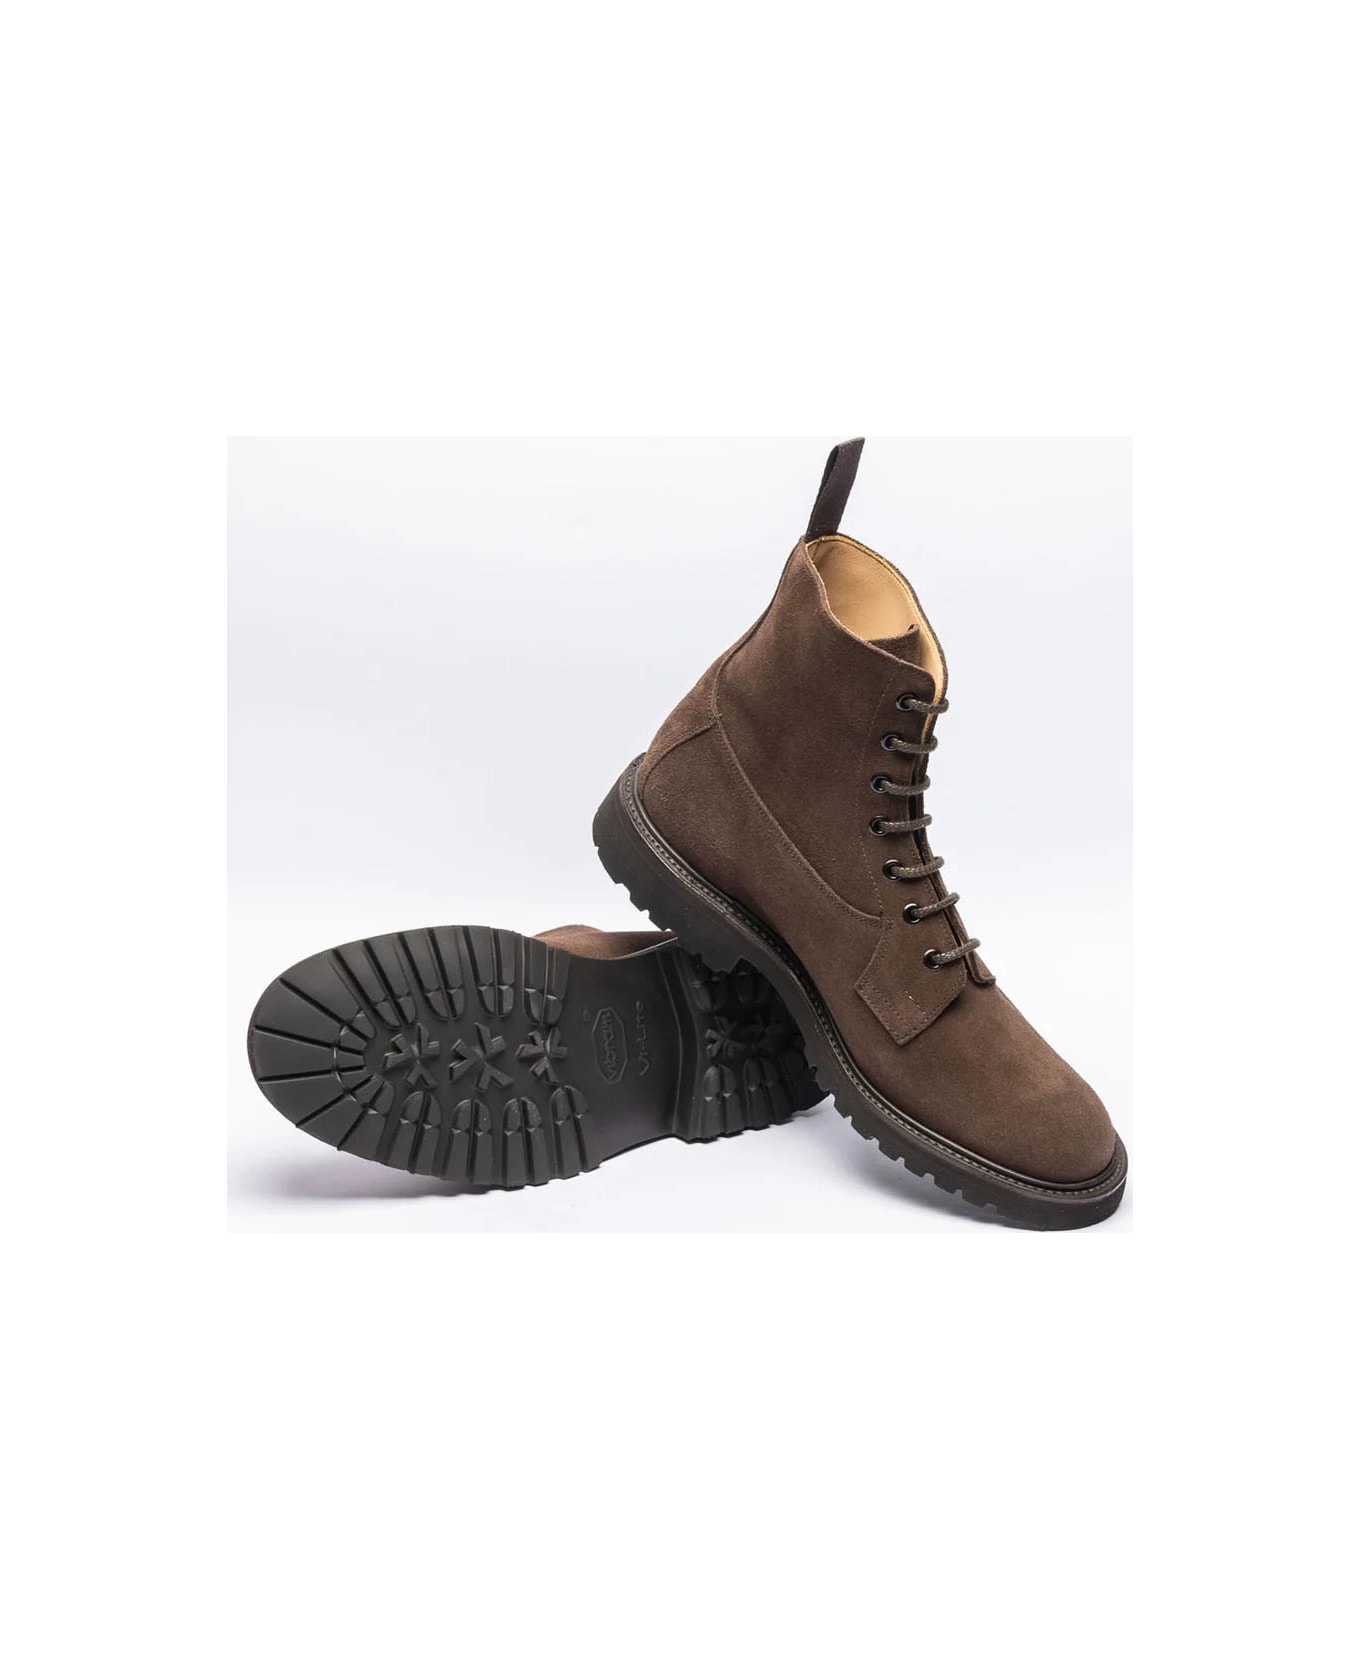 Tricker's Burford Brown Suede Lace-up Boot Vibram Sole - Marrone ブーツ